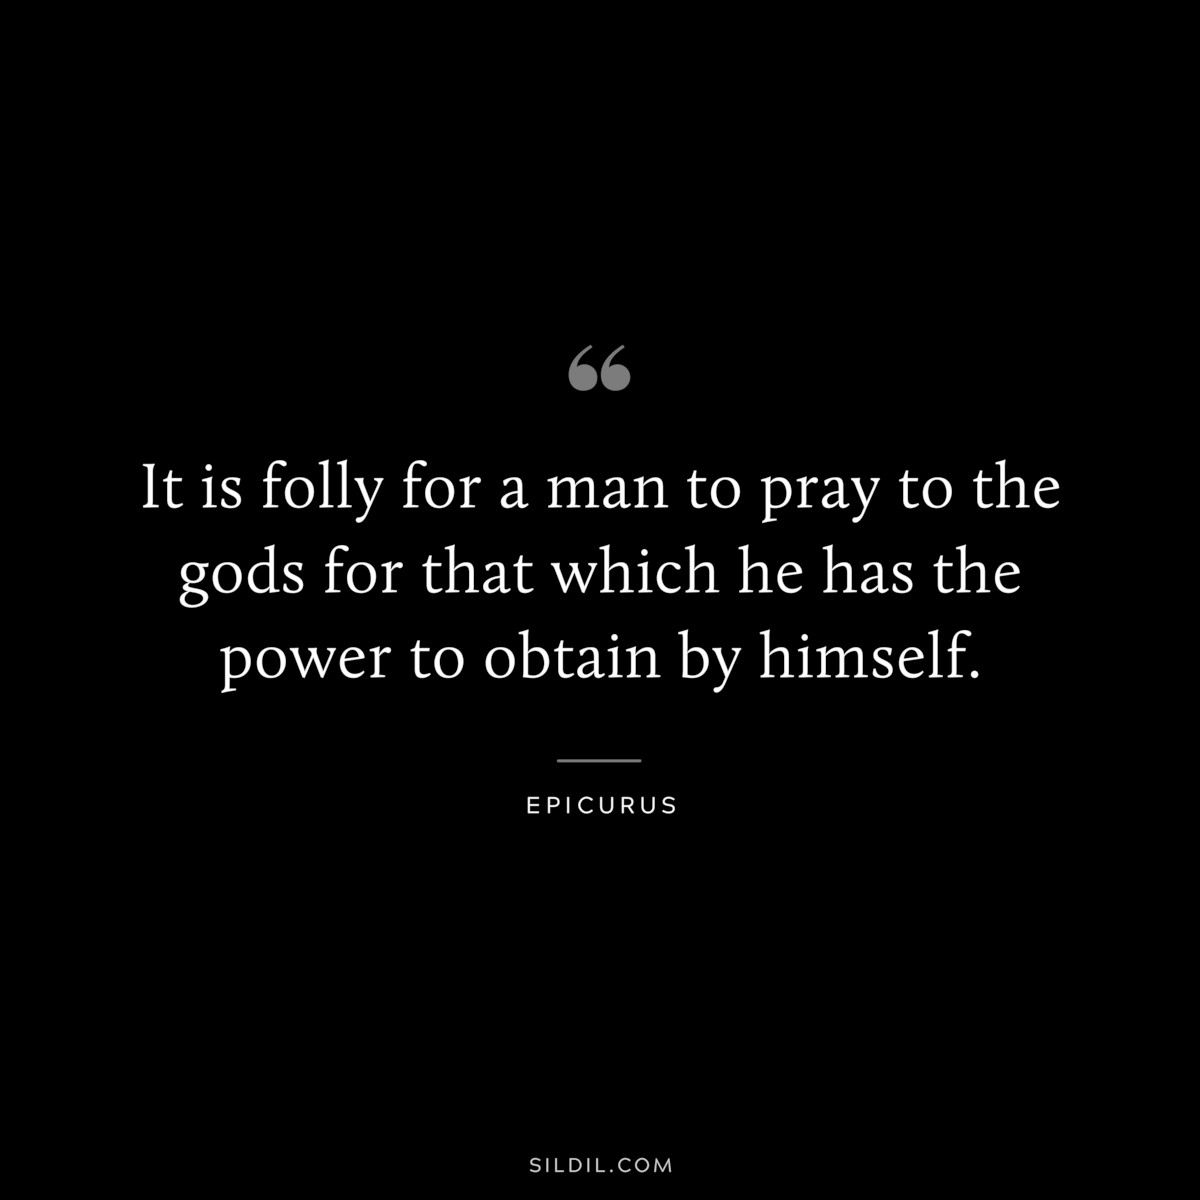 It is folly for a man to pray to the gods for that which he has the power to obtain by himself. — Epicurus